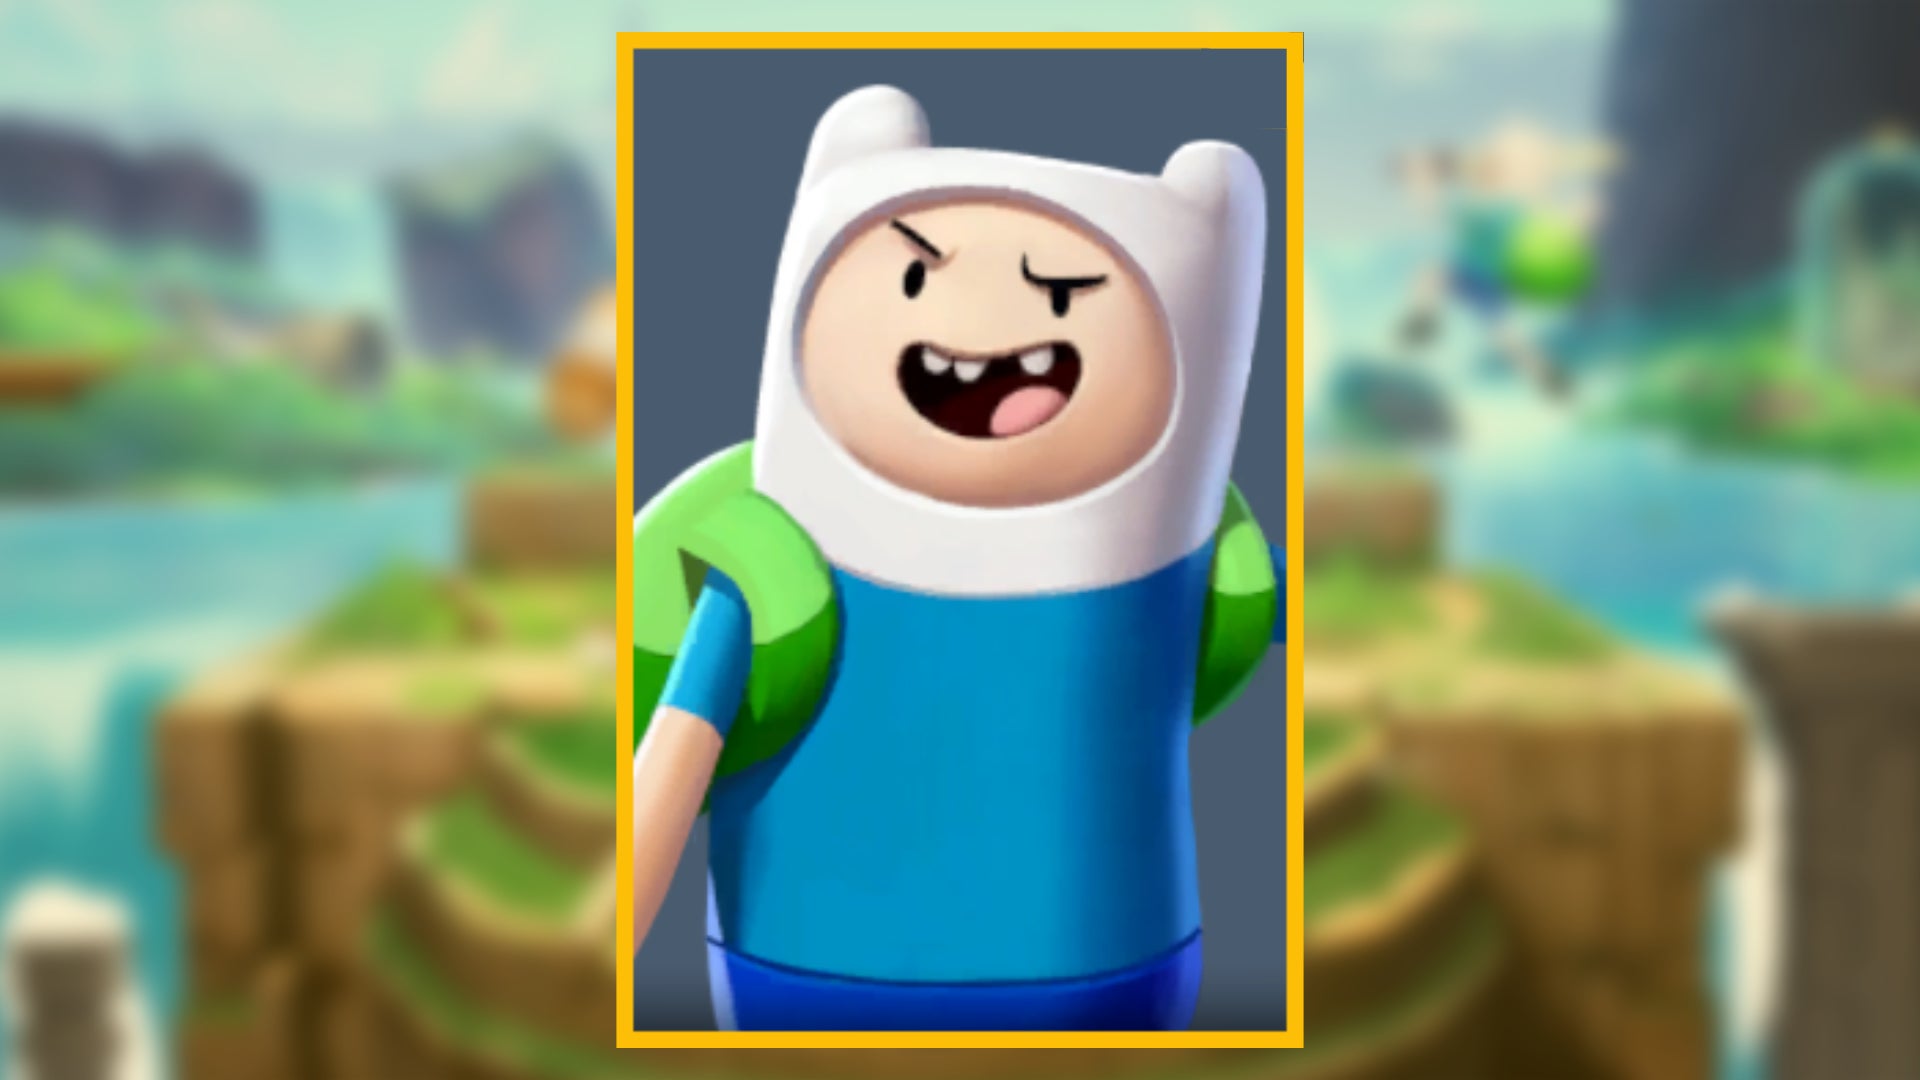 The character portrait of Finn, a playable character in MultiVersus, against a blurred background.